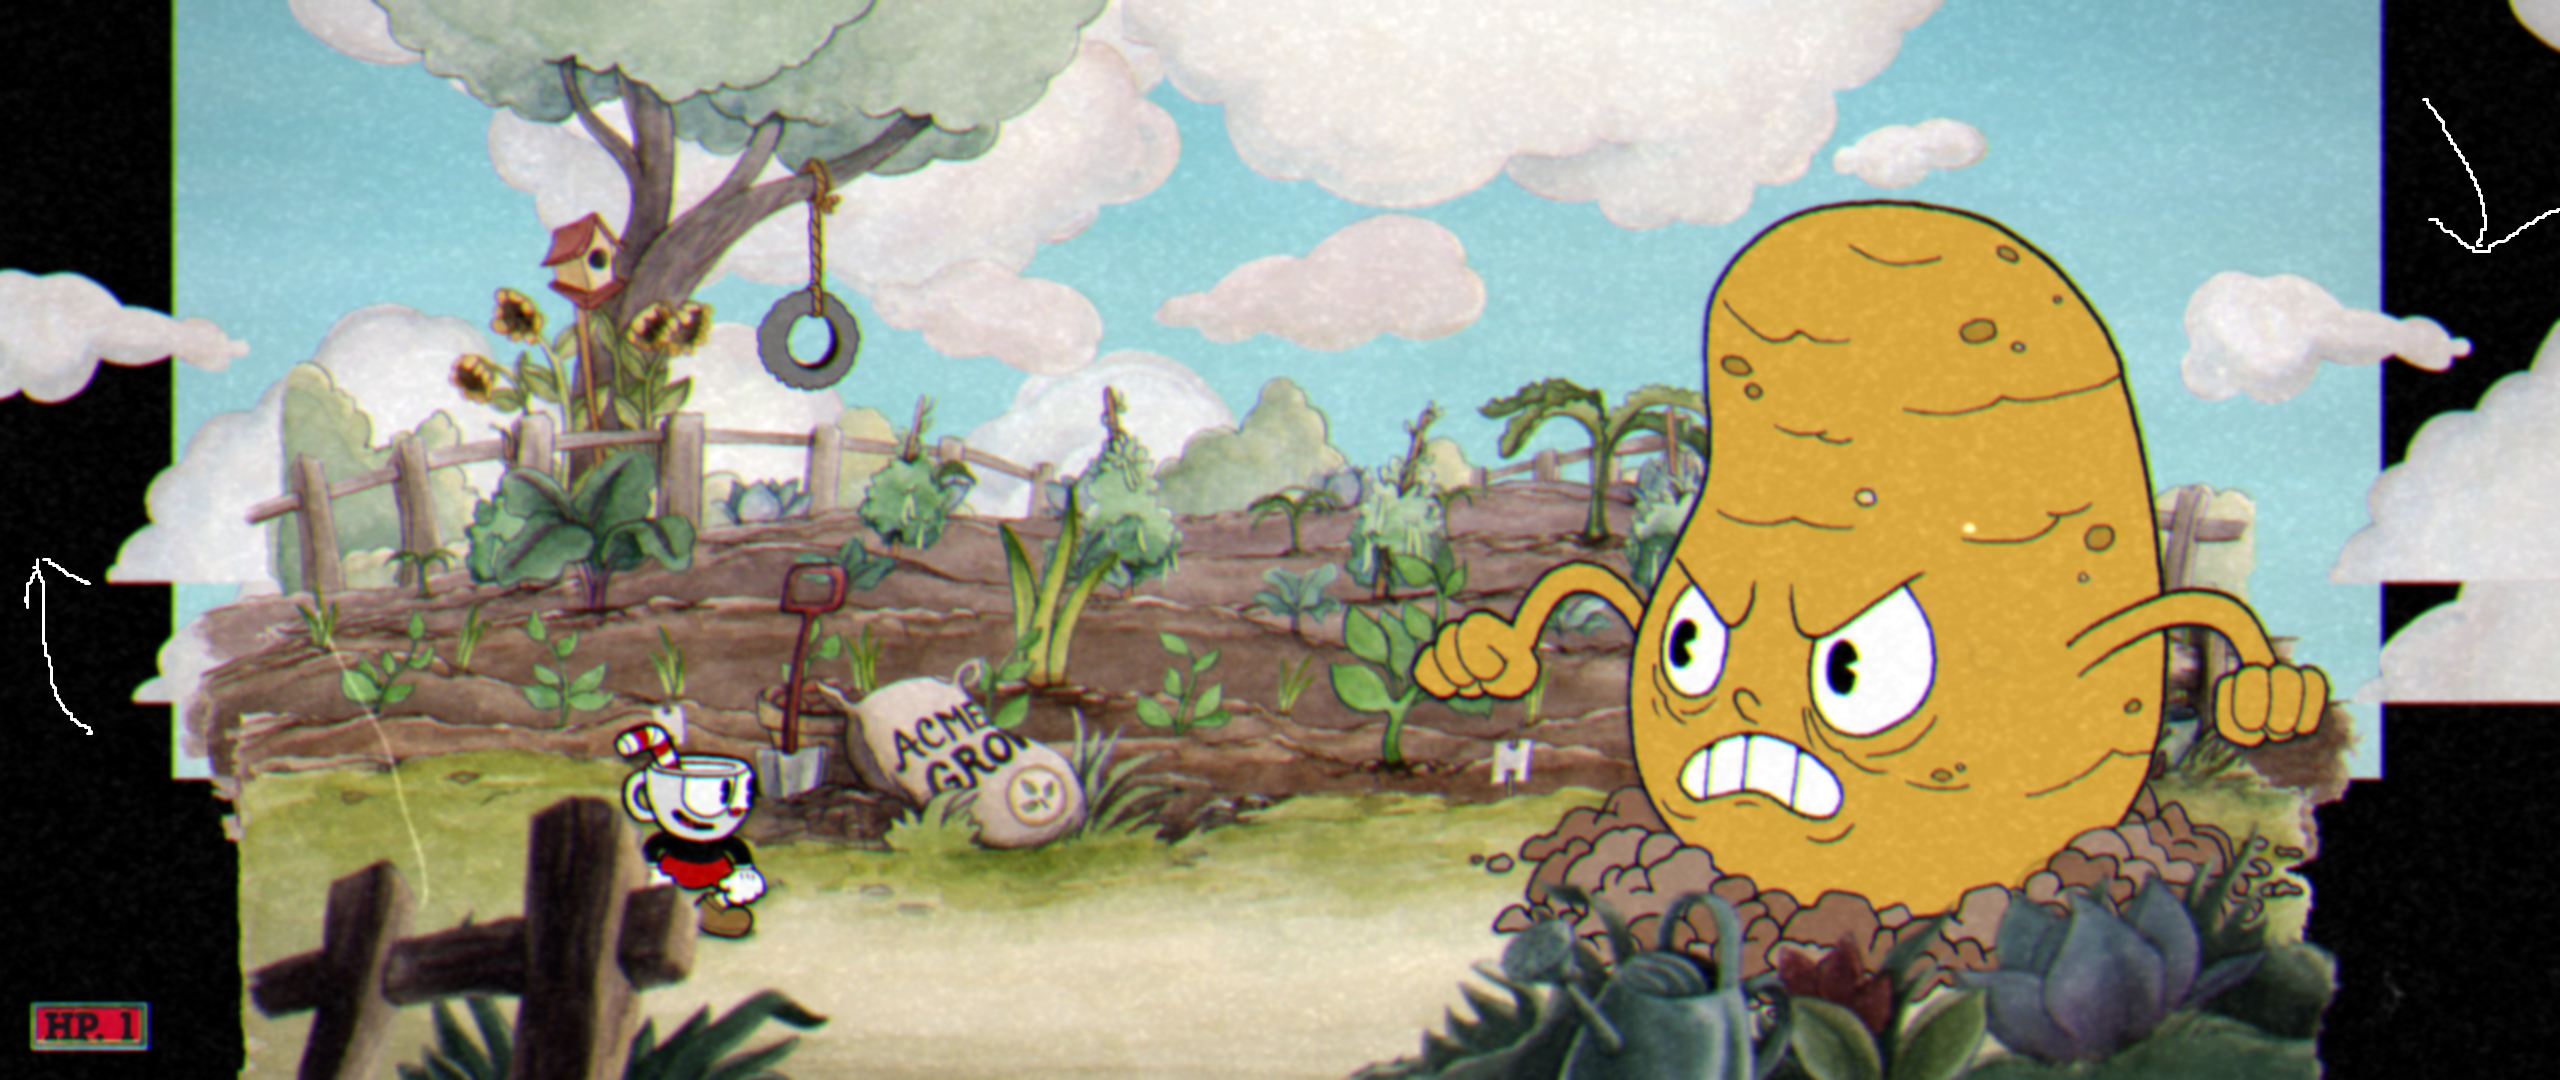 Cuphead_2017_09_29_21_13_23_448.png